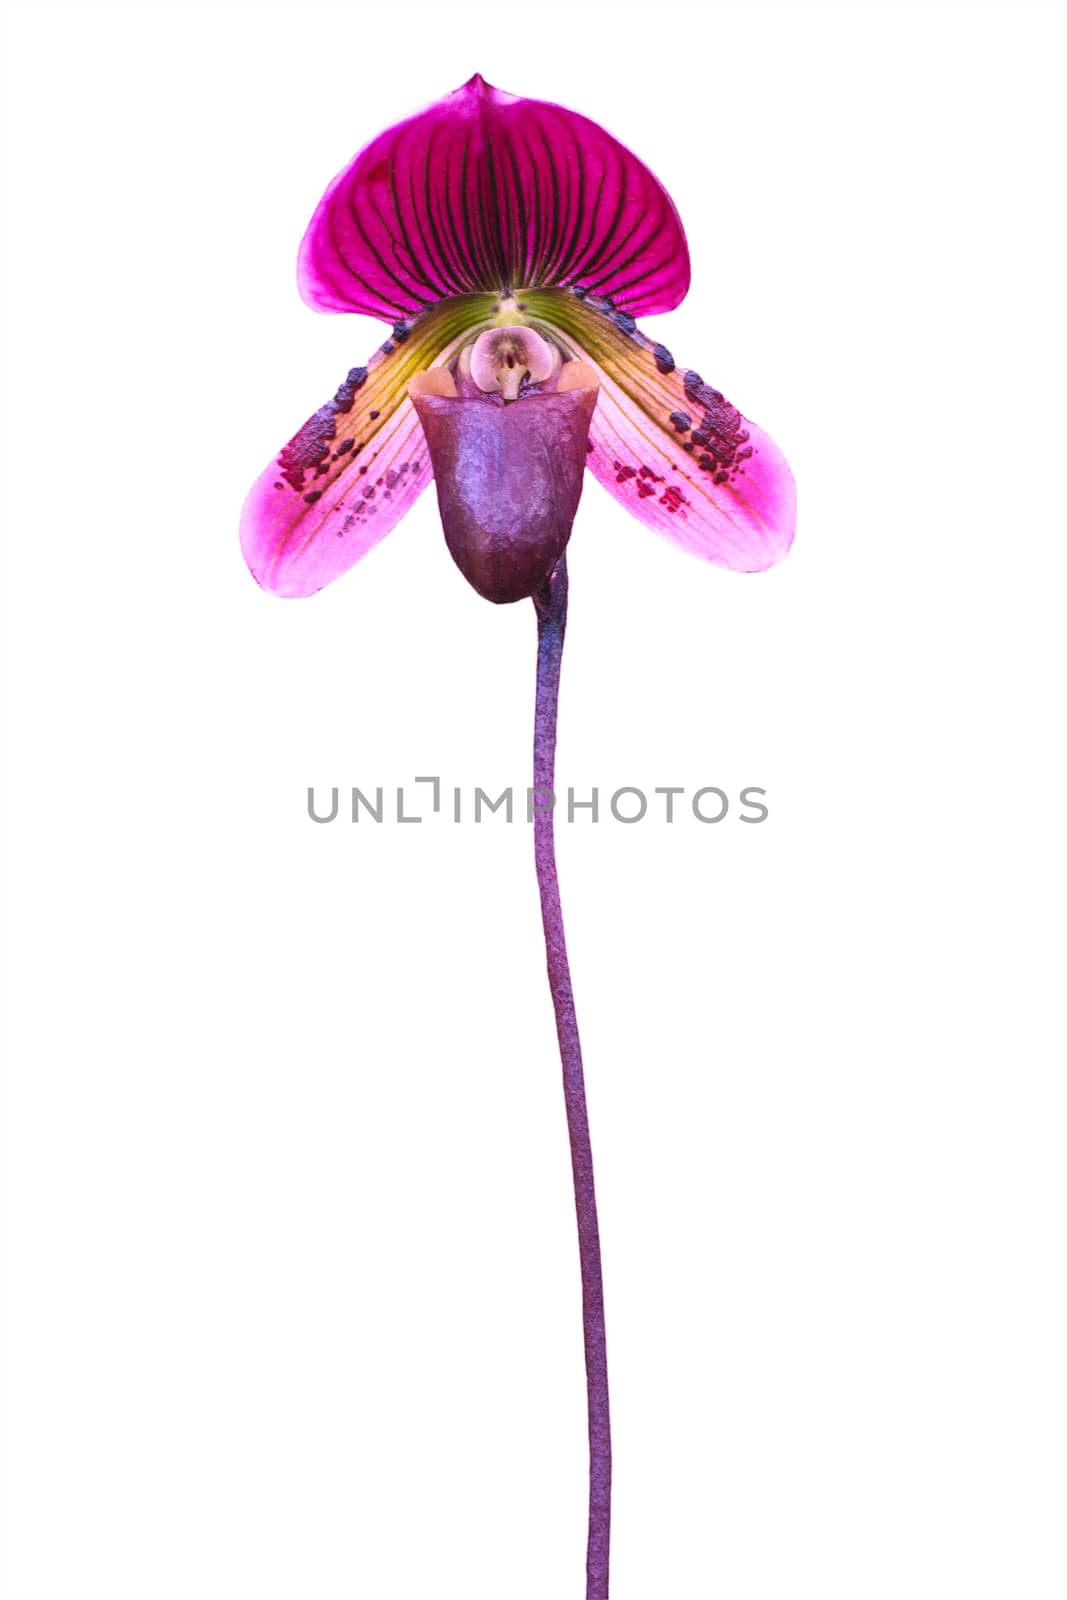 Lady's slipper orchid. Paphiopedilum Callosum isolated on white  by khunaspix